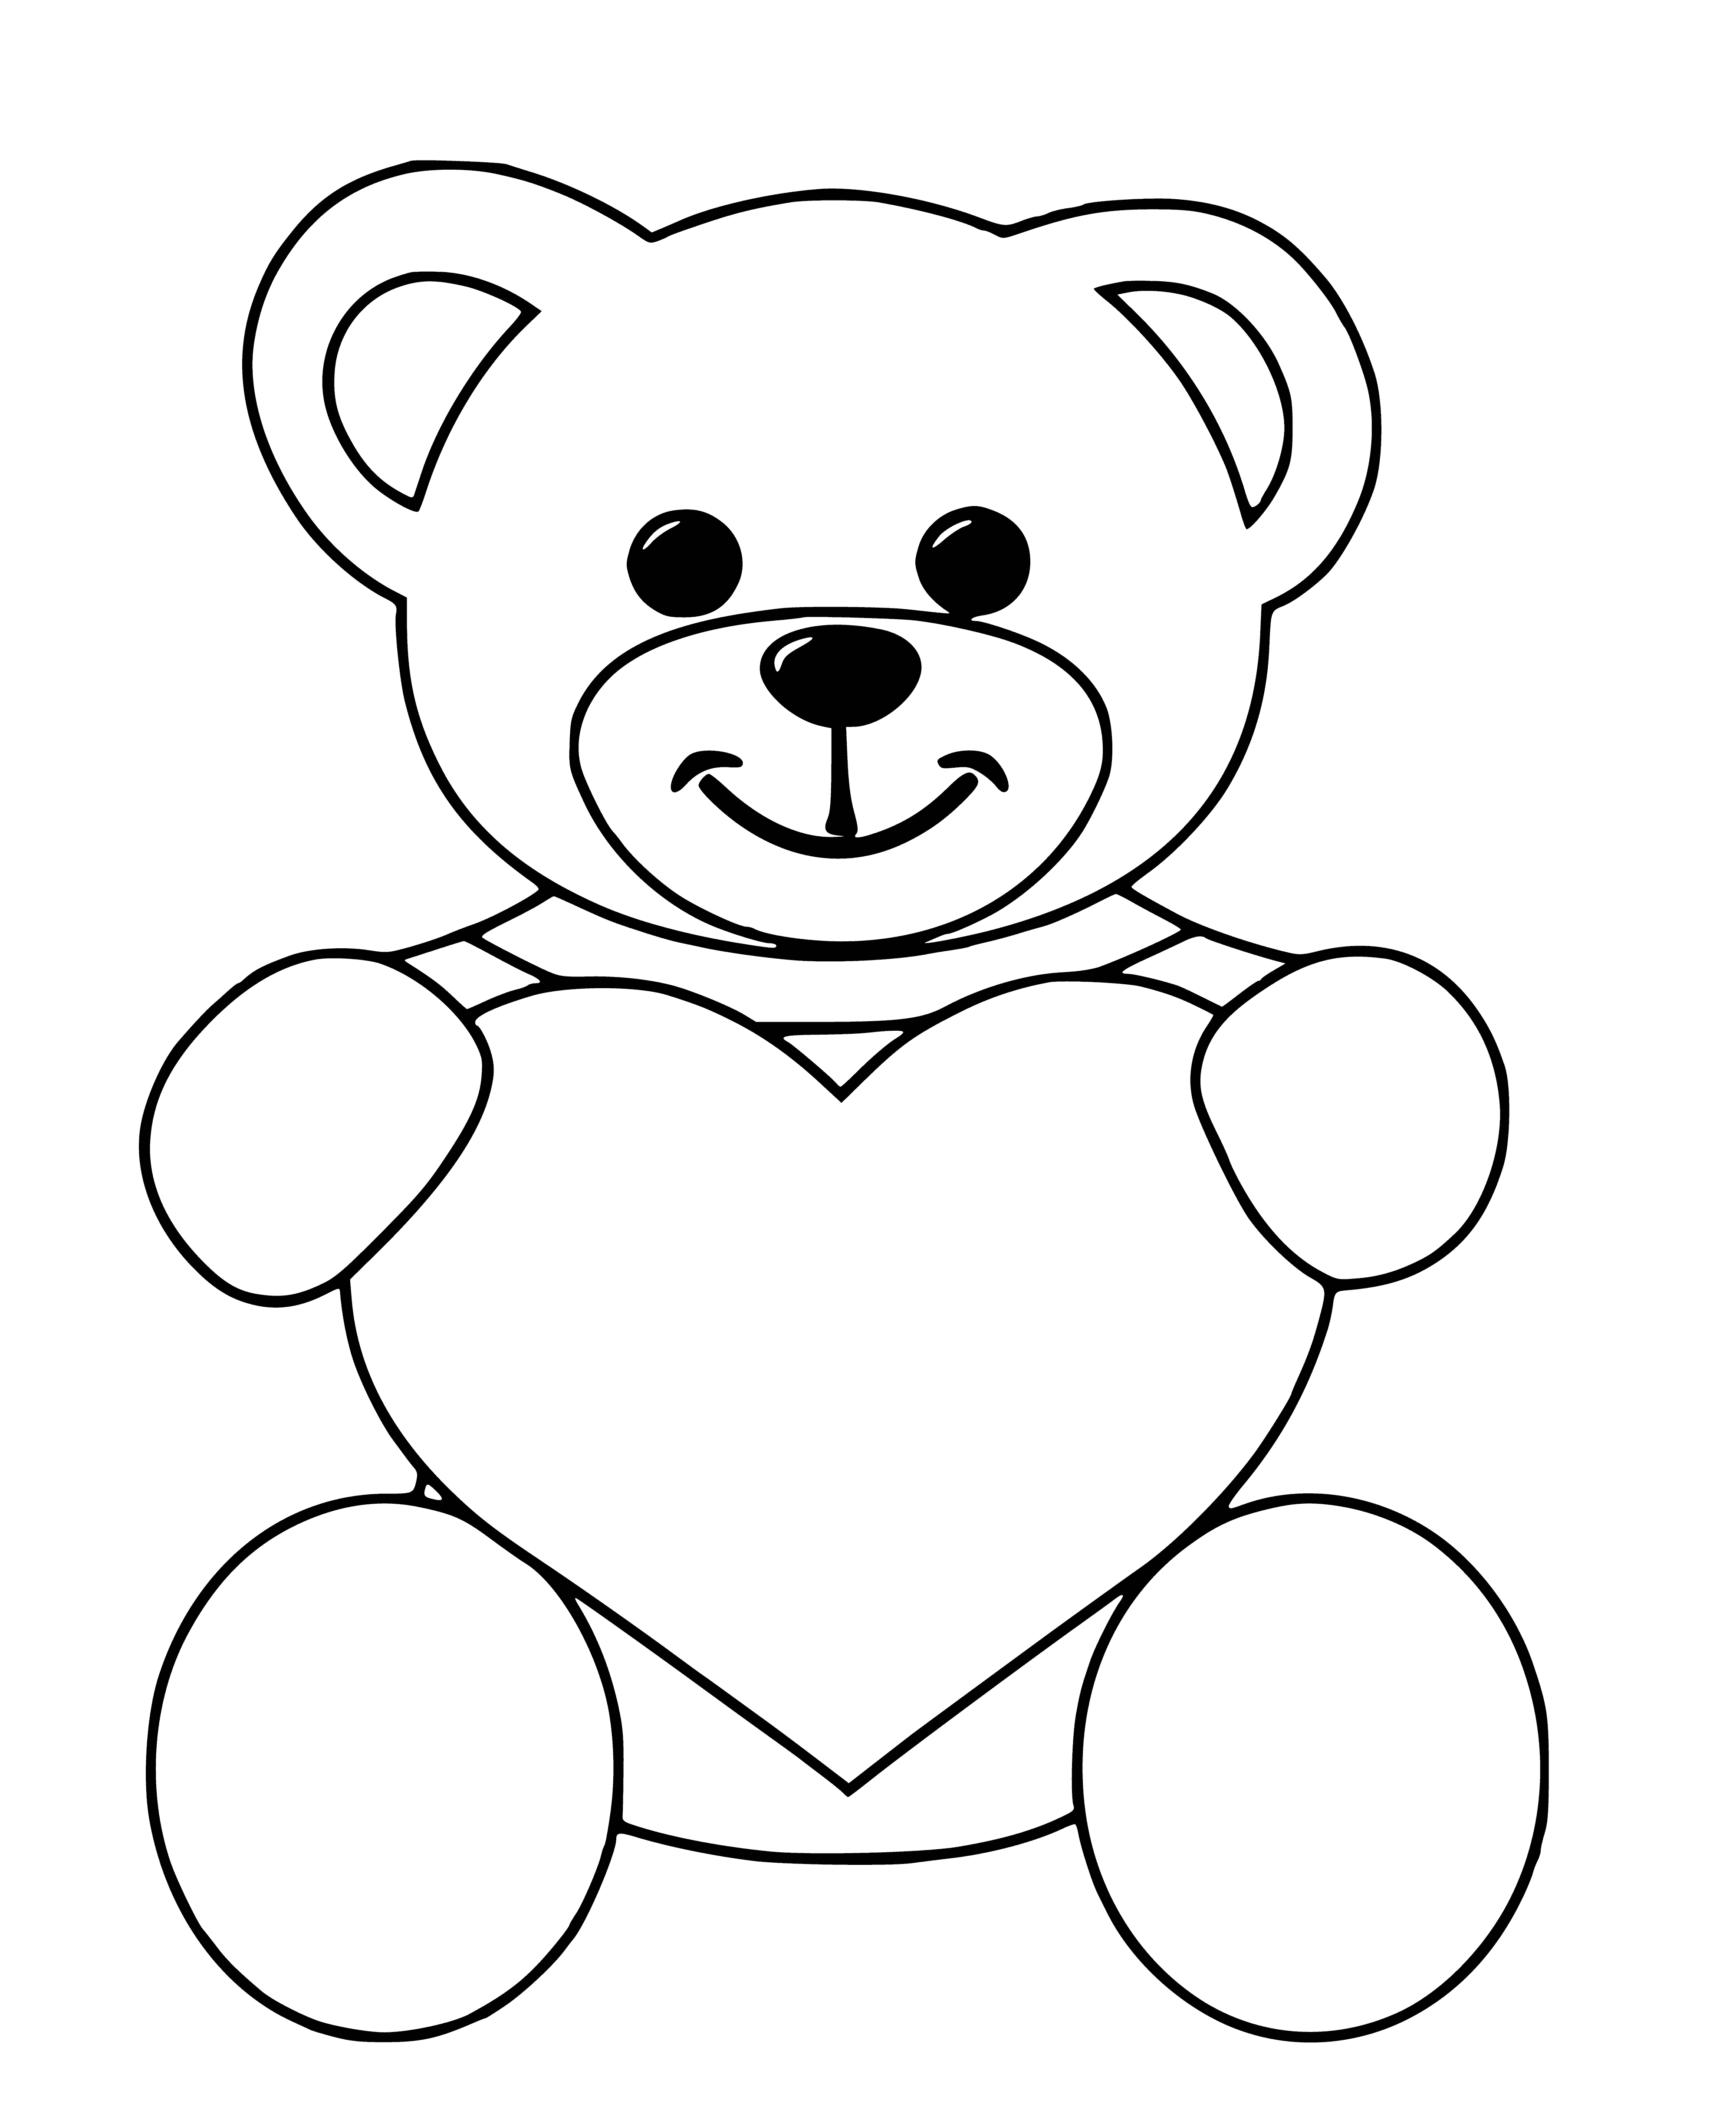 coloring page: Teddy bear holds red valentine and balloon, wears heart-shaped pendant—perfect Valentine's Day companion!